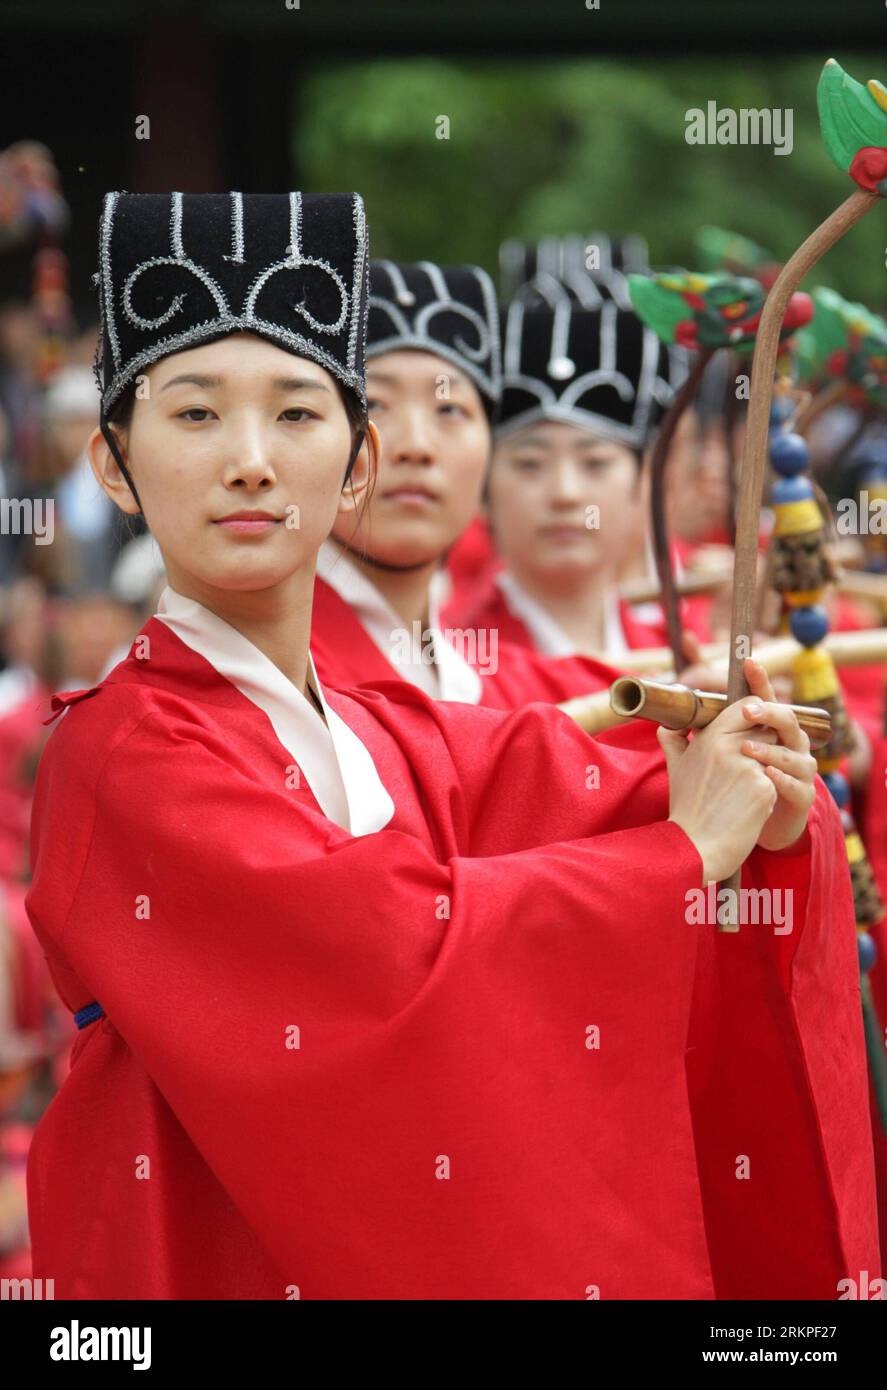 Bildnummer: 57979825  Datum: 11.05.2012  Copyright: imago/Xinhua (120511) -- SEOUL, May 11, 2012 (Xinhua) -- College students wearing traditional costumes perform traditional ritual at a Confucian shrine in Seoul, South Korea, May 11, 2012. The Confucius ritual is staged twice a year at the Confucian Shrine at Sungkyunkwan University in Seoul, which was built during the Joseon Dynasty in 1398 for Korean Confucian scholars to honor Confucius. (Xinhua/Park Jin-hee) SOUTH KOREA-SEOUL-CONFUCIUS RITUAL PUBLICATIONxNOTxINxCHN Gesellschaft xda x2x 2012 hoch  o0 Konfuzianismus Tradition Bildung Uni St Stock Photo